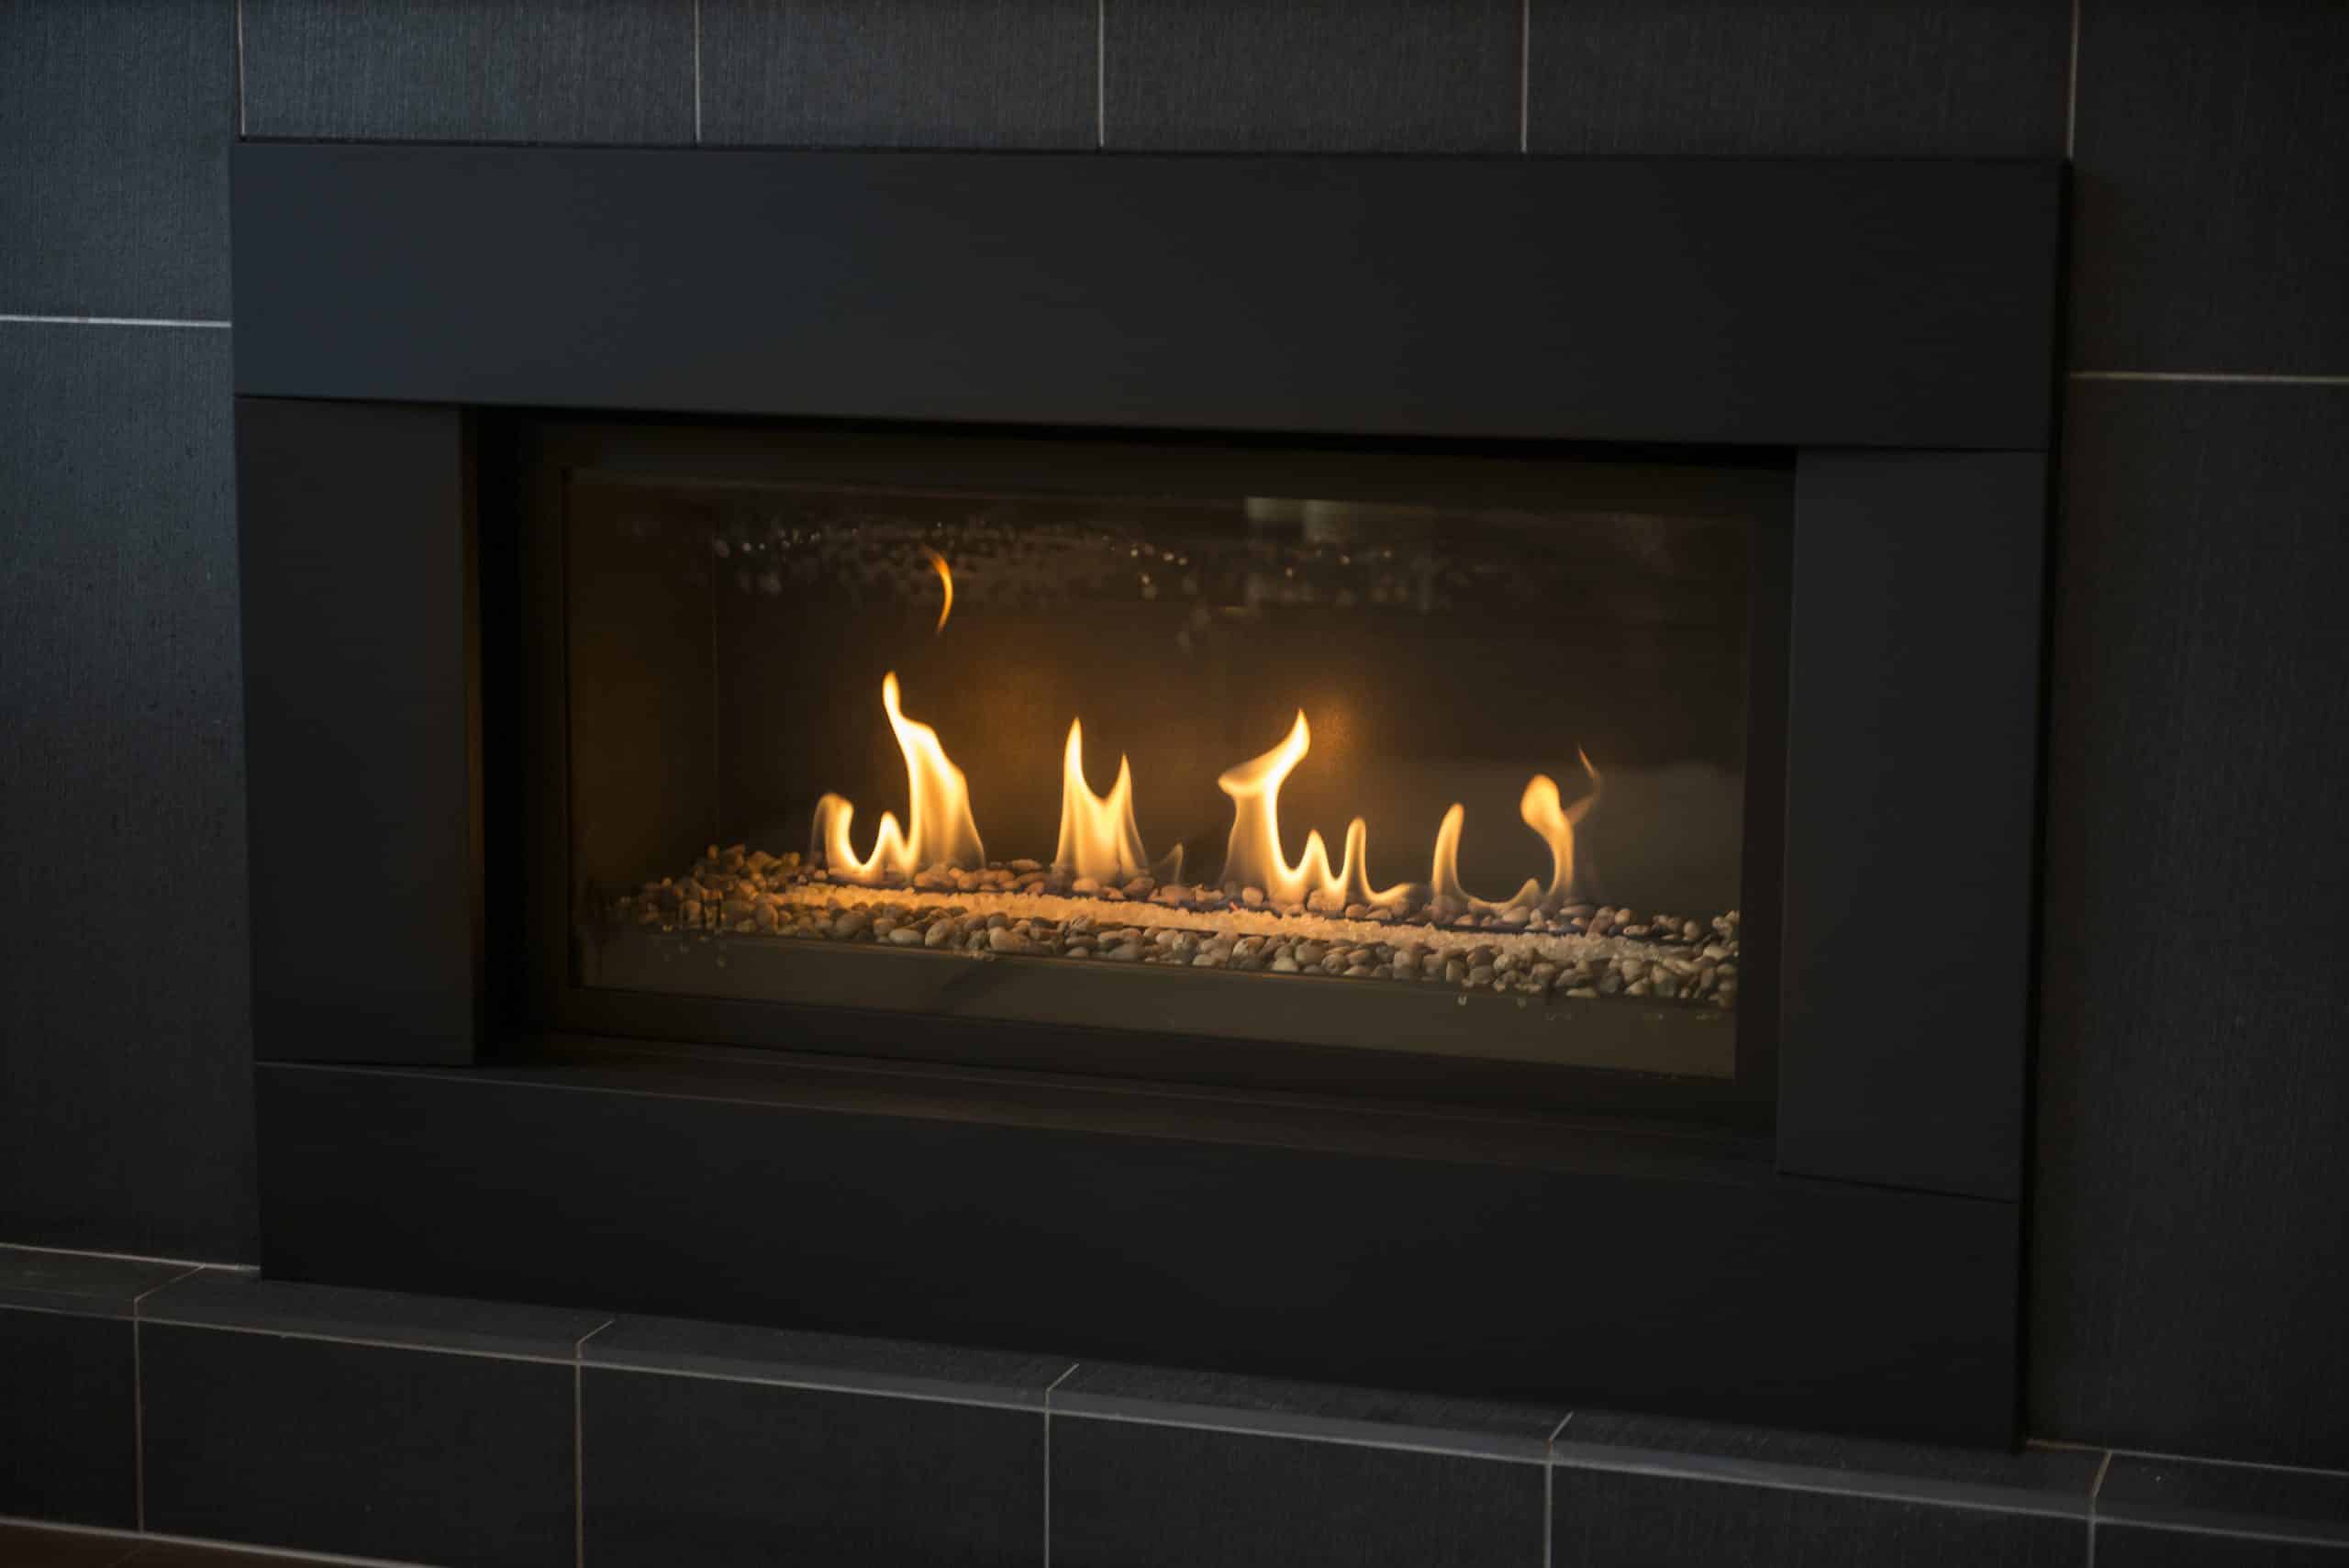 A modern gas fireplace surrounded by a black panel and black tiles